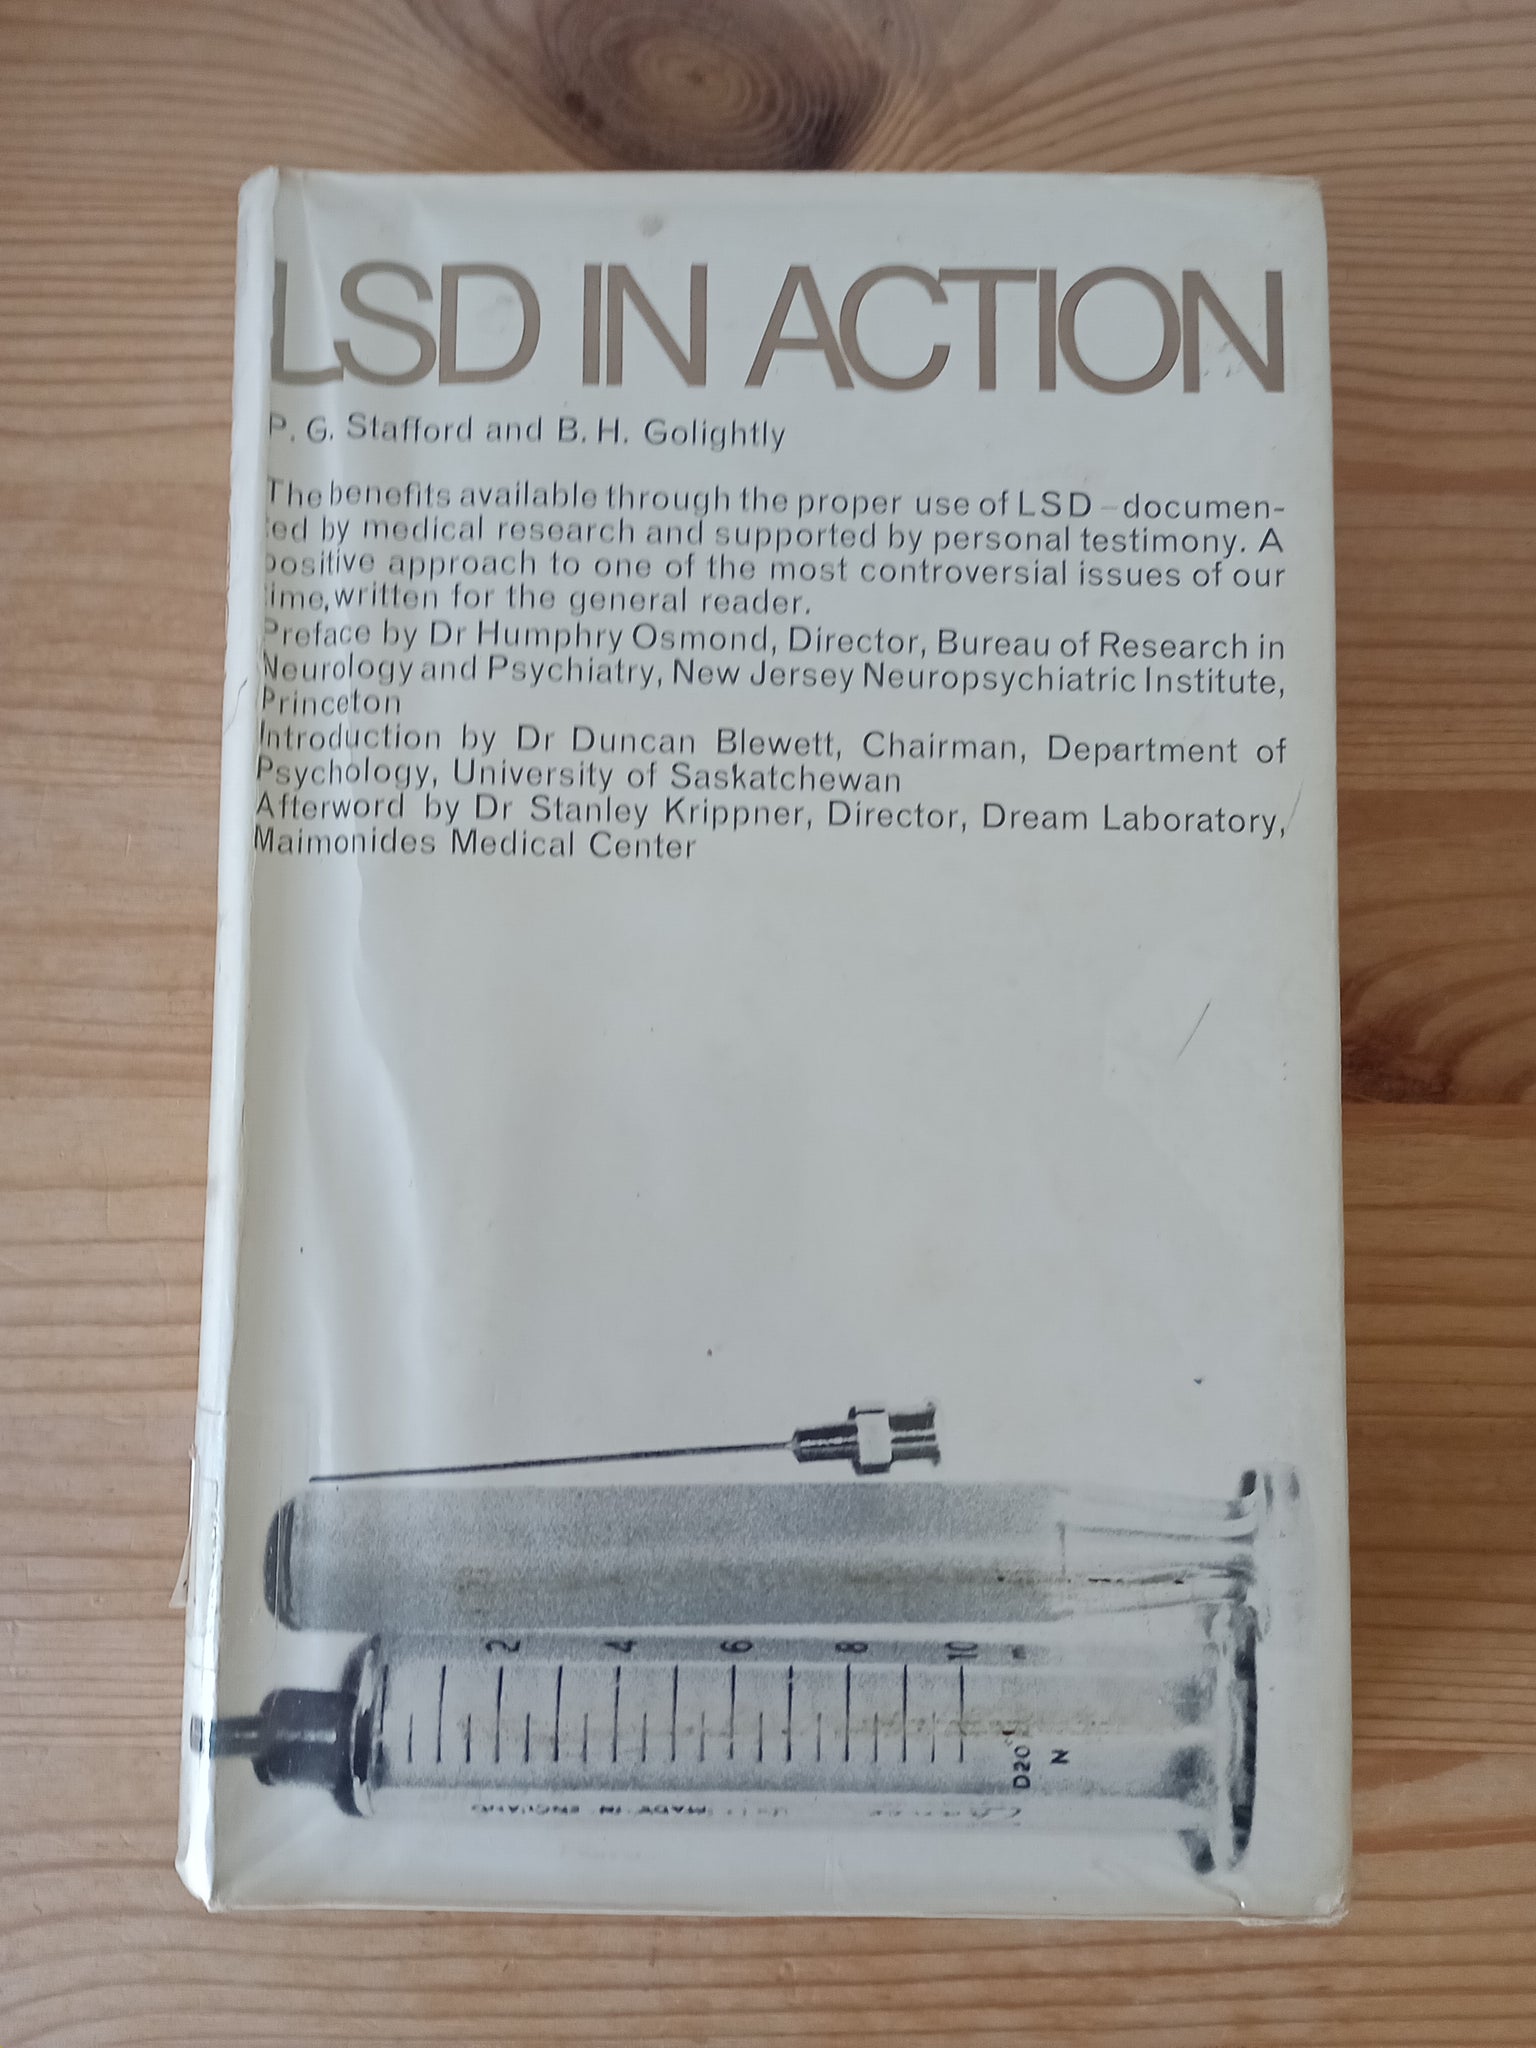 LSD in Action (1969) by PG Stafford & BH Golightly